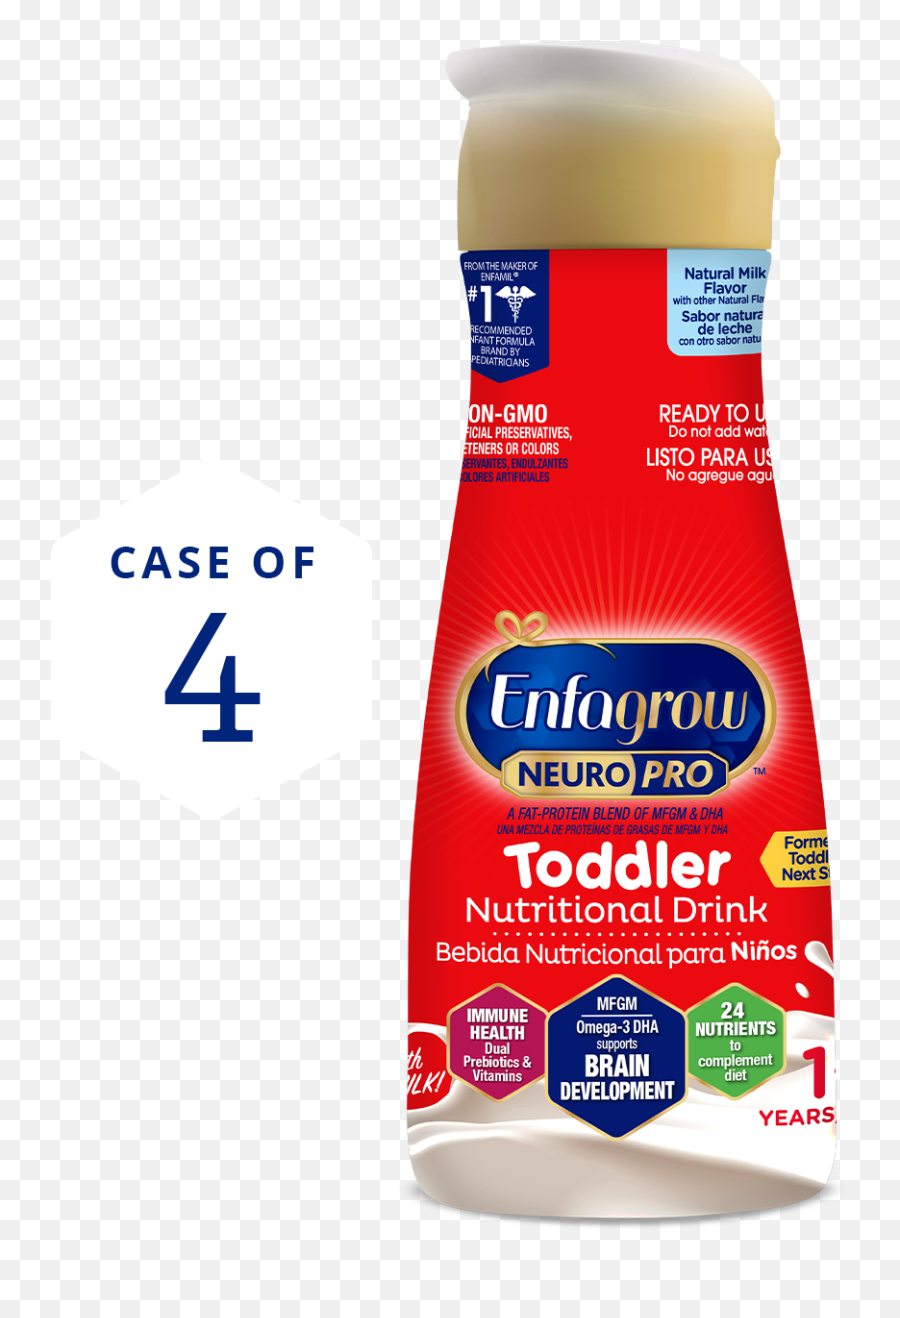 Toddler Vitamins Nutritional Drink Enfamil - Enfagrow Toddler Nutritional Drink Emoji,Espire: Your Guide To Emotions Activity